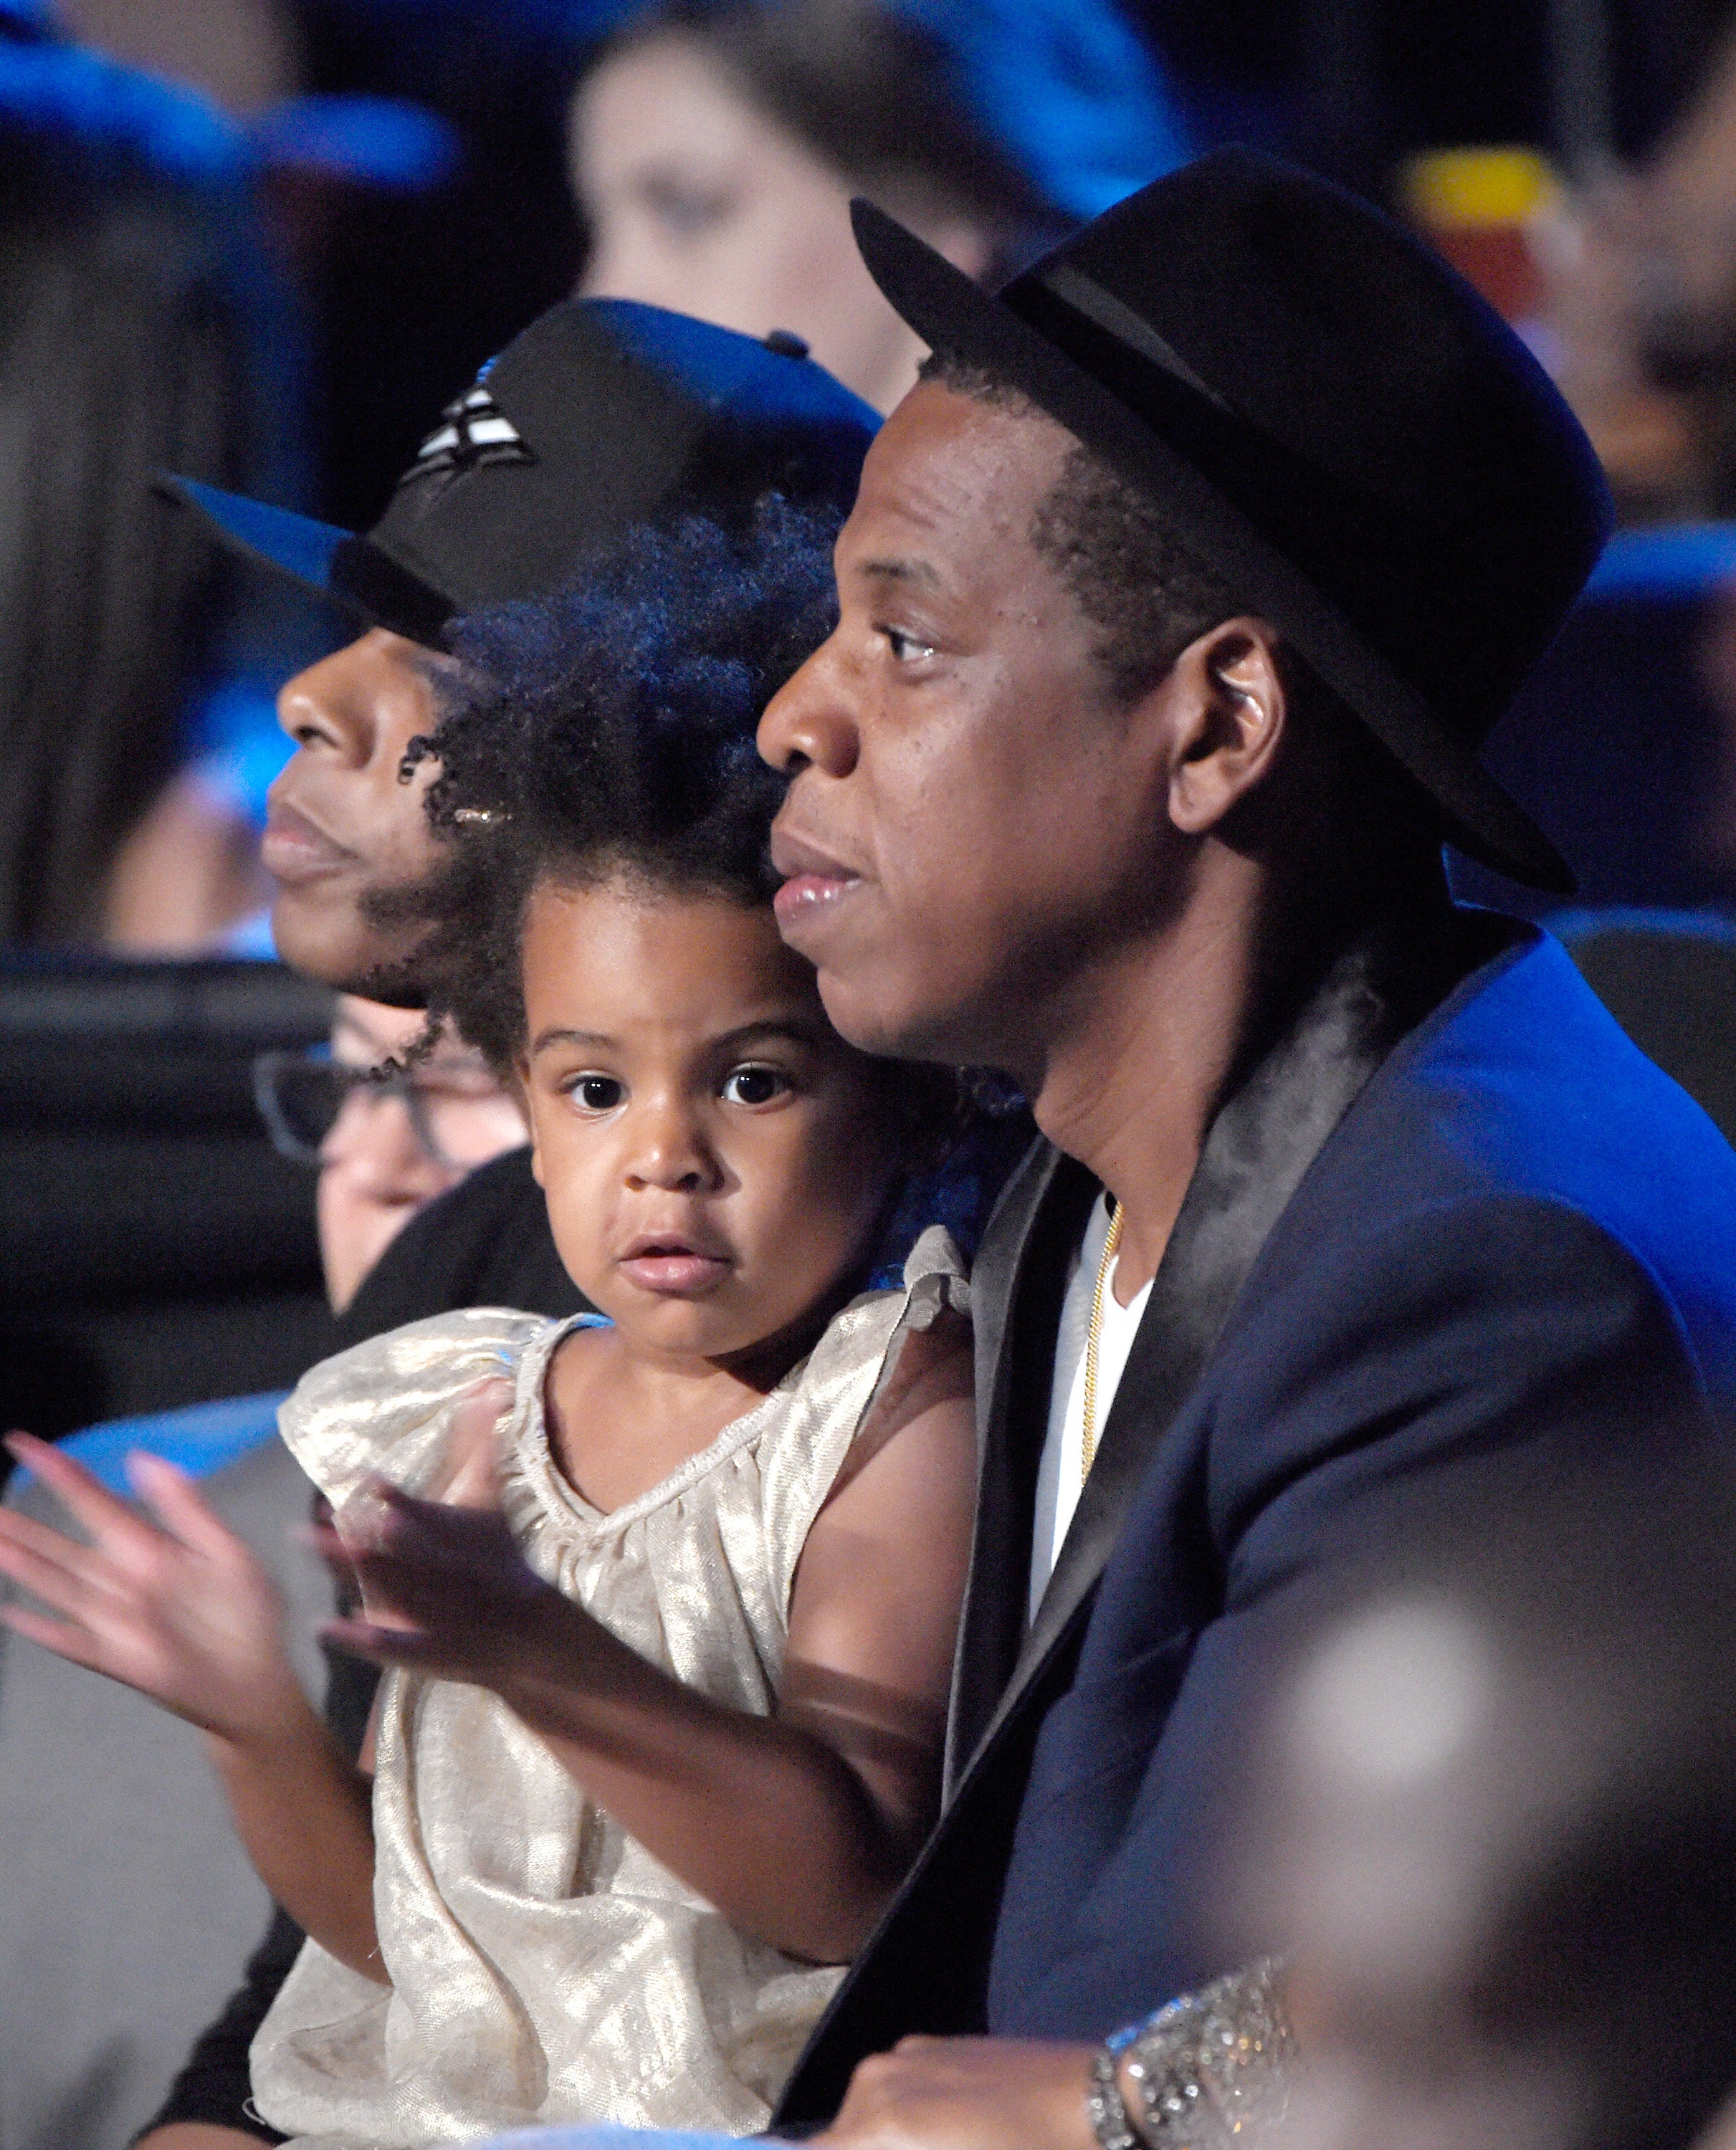 Preciousness! Jay Z and Blue Ivy's Sweetest Daddy-Daughter Moments
